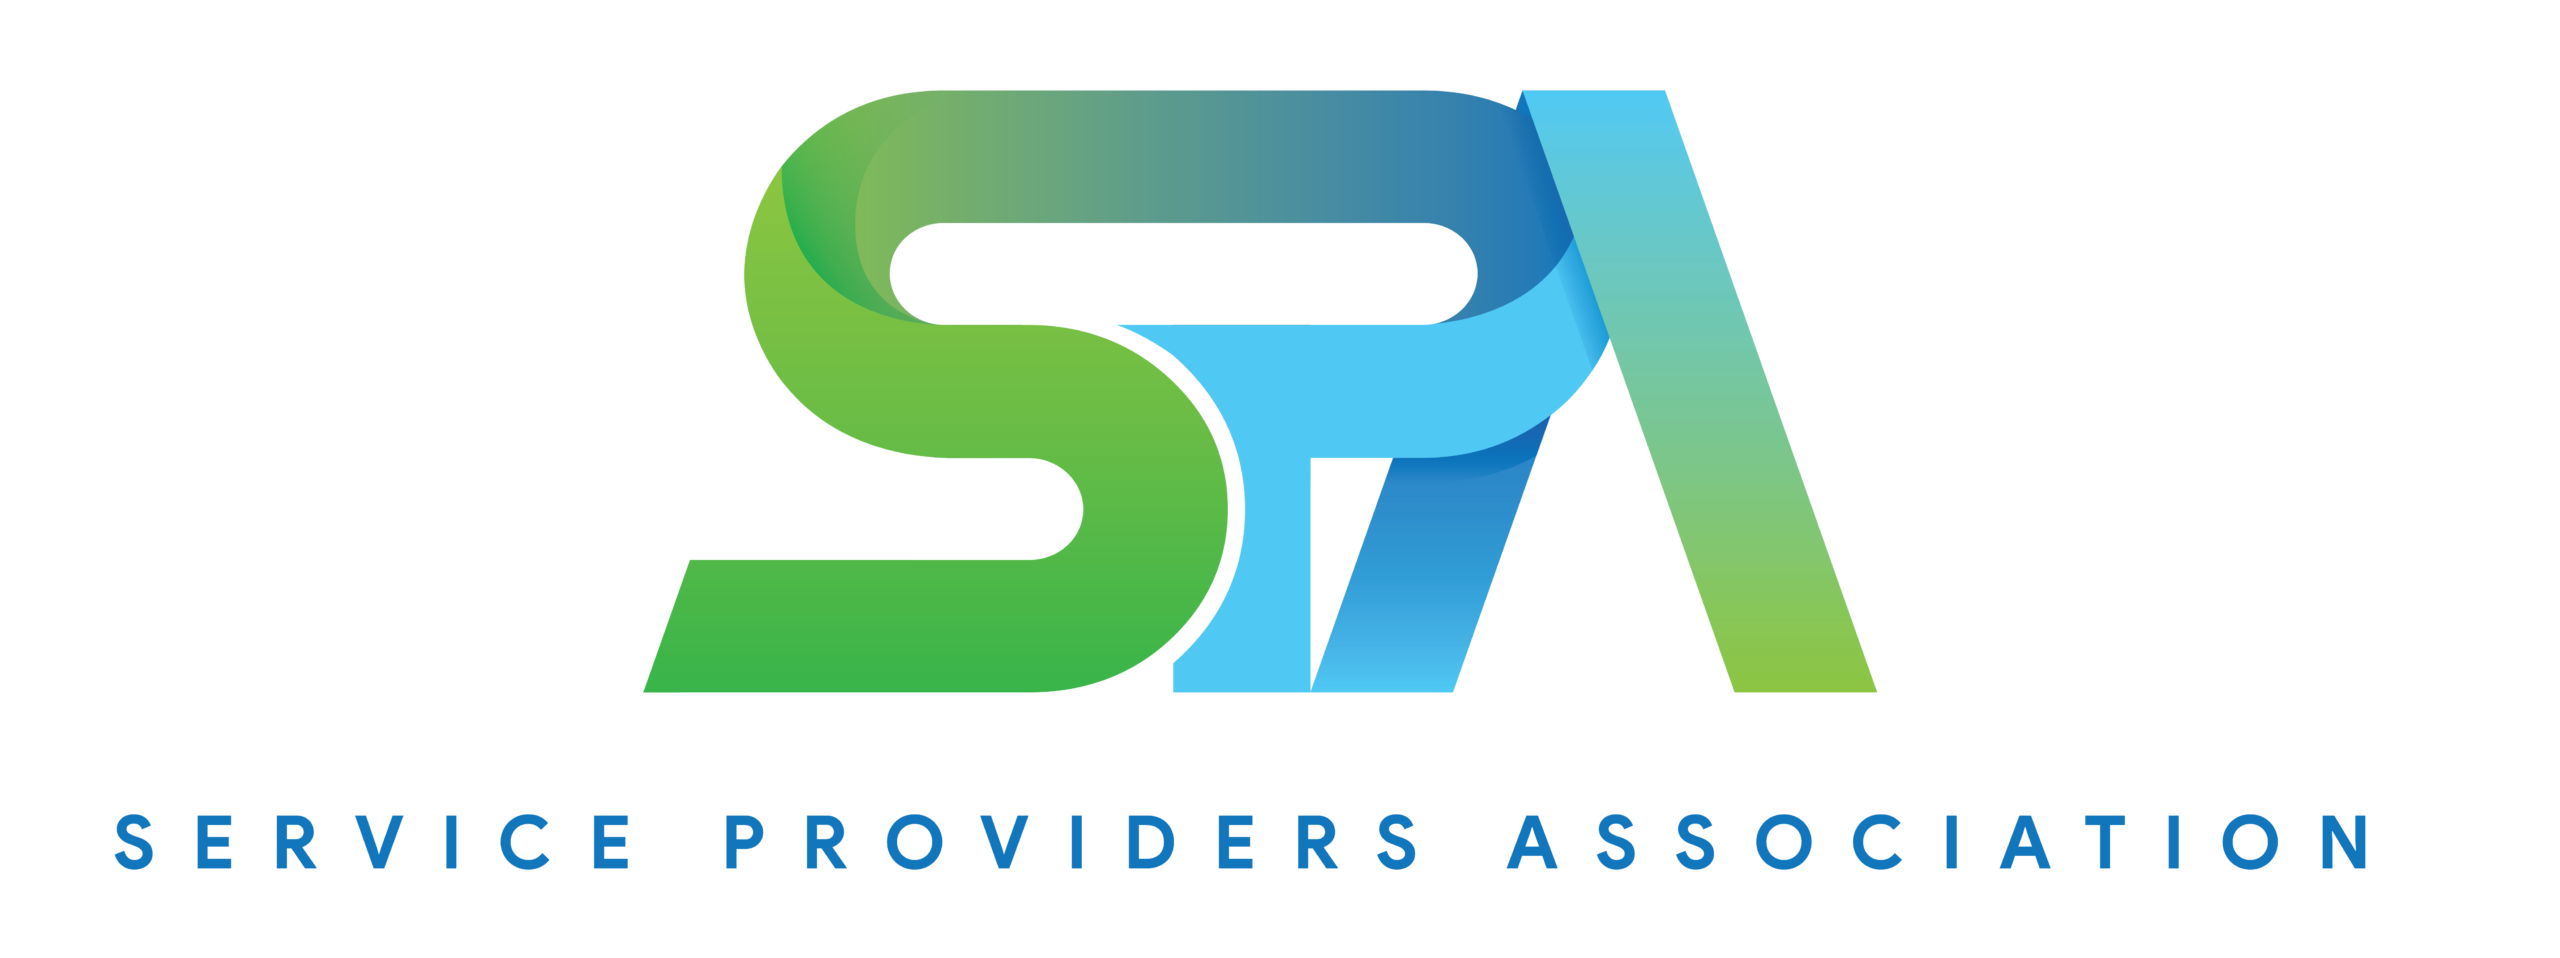 Stylized aqua and green logo with the acronym "spa" for the service providers association.